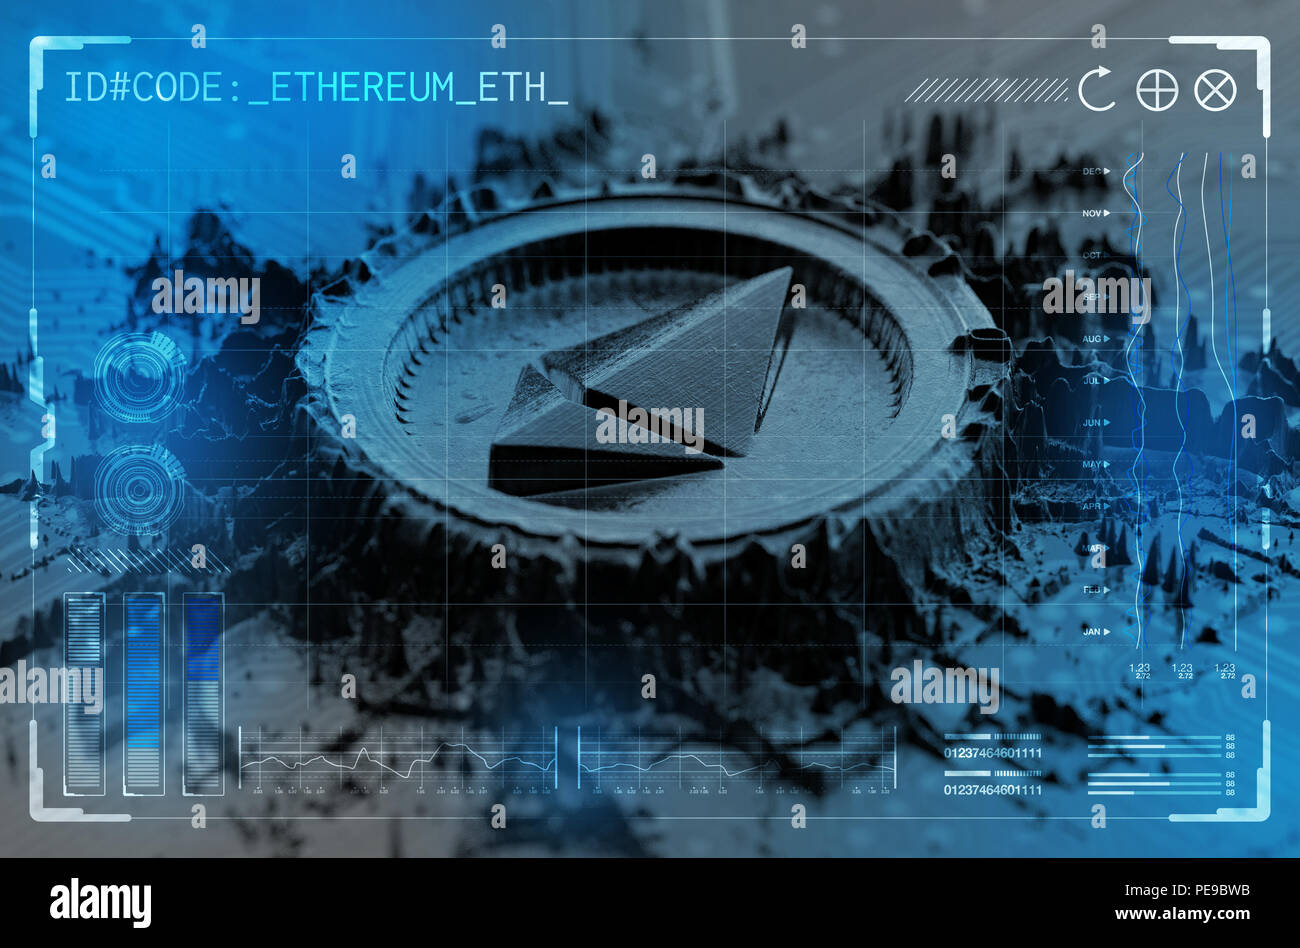 Extruded metal particles that build up to form a physical ethereum cryptocurrency symbol overlaid with a technical data analysis interface - 3D render Stock Photo